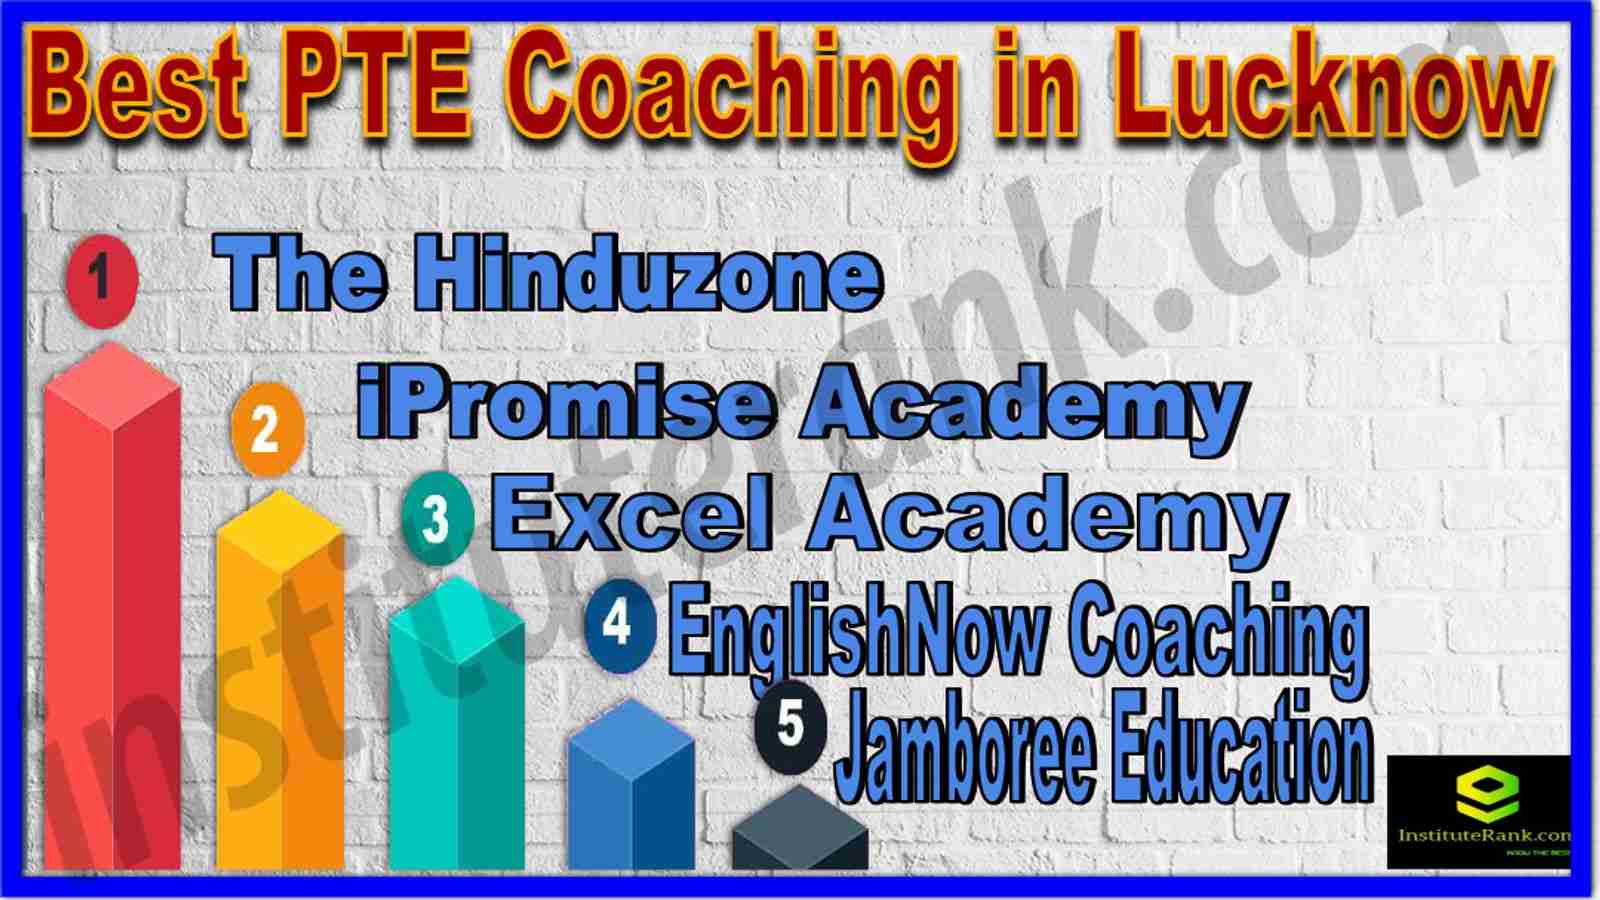 Best PTE Coaching In Lucknow